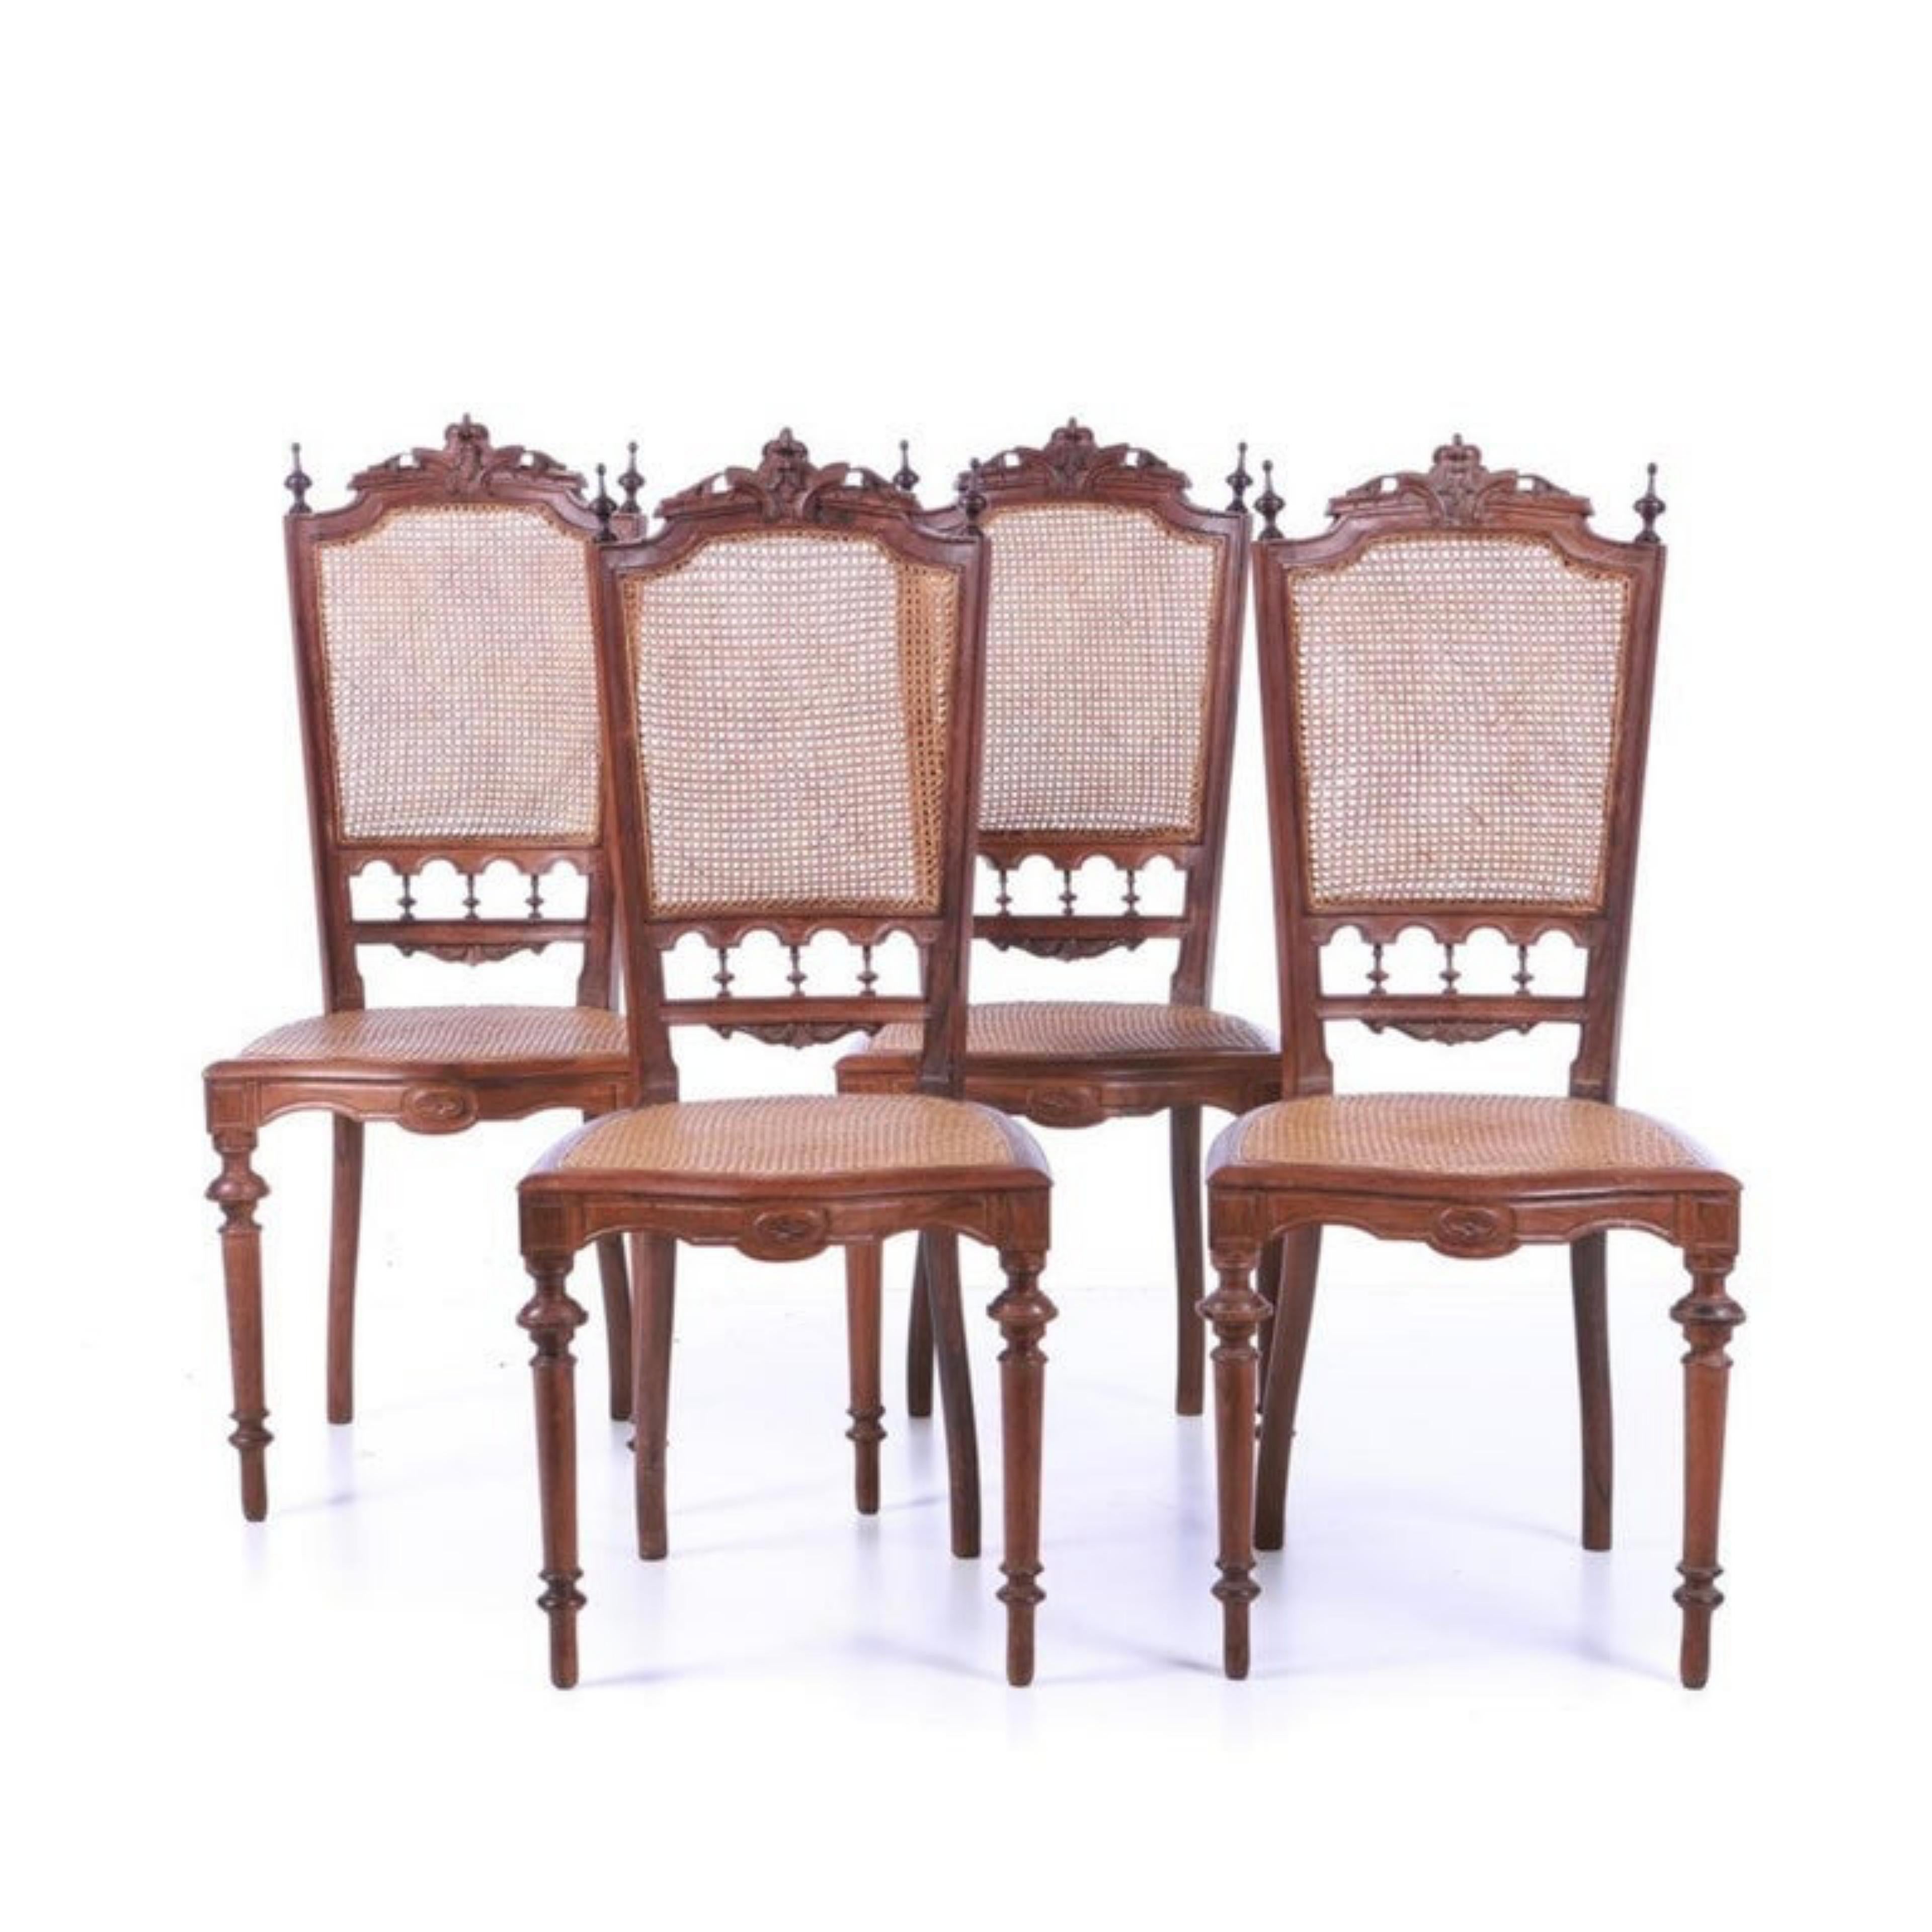 4 Portuguese Chairs 19th Century in Brazilian Rosewood In Good Condition For Sale In Madrid, ES